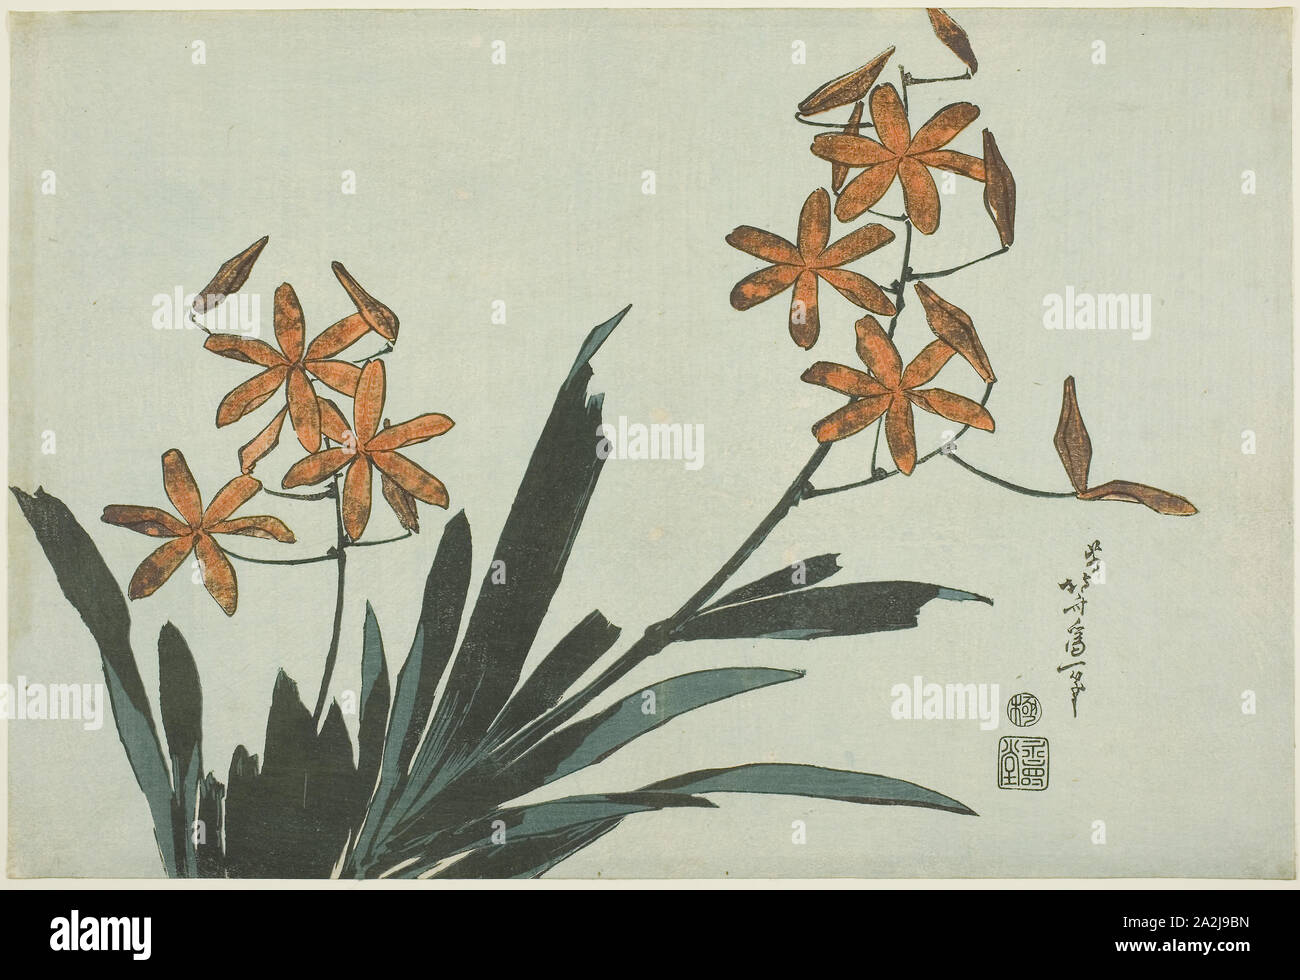 Orange Orchids, from an untitled series of flowers, c. 1832, Katsushika Hokusai 葛飾 北斎, Japanese, 1760-1849, Publisher: Hibino Yohachi, Japanese, unknown, Japan, Color woodblock print, oban, 25.5 x 37.7 cm (10 x 14 1/2 in Stock Photo